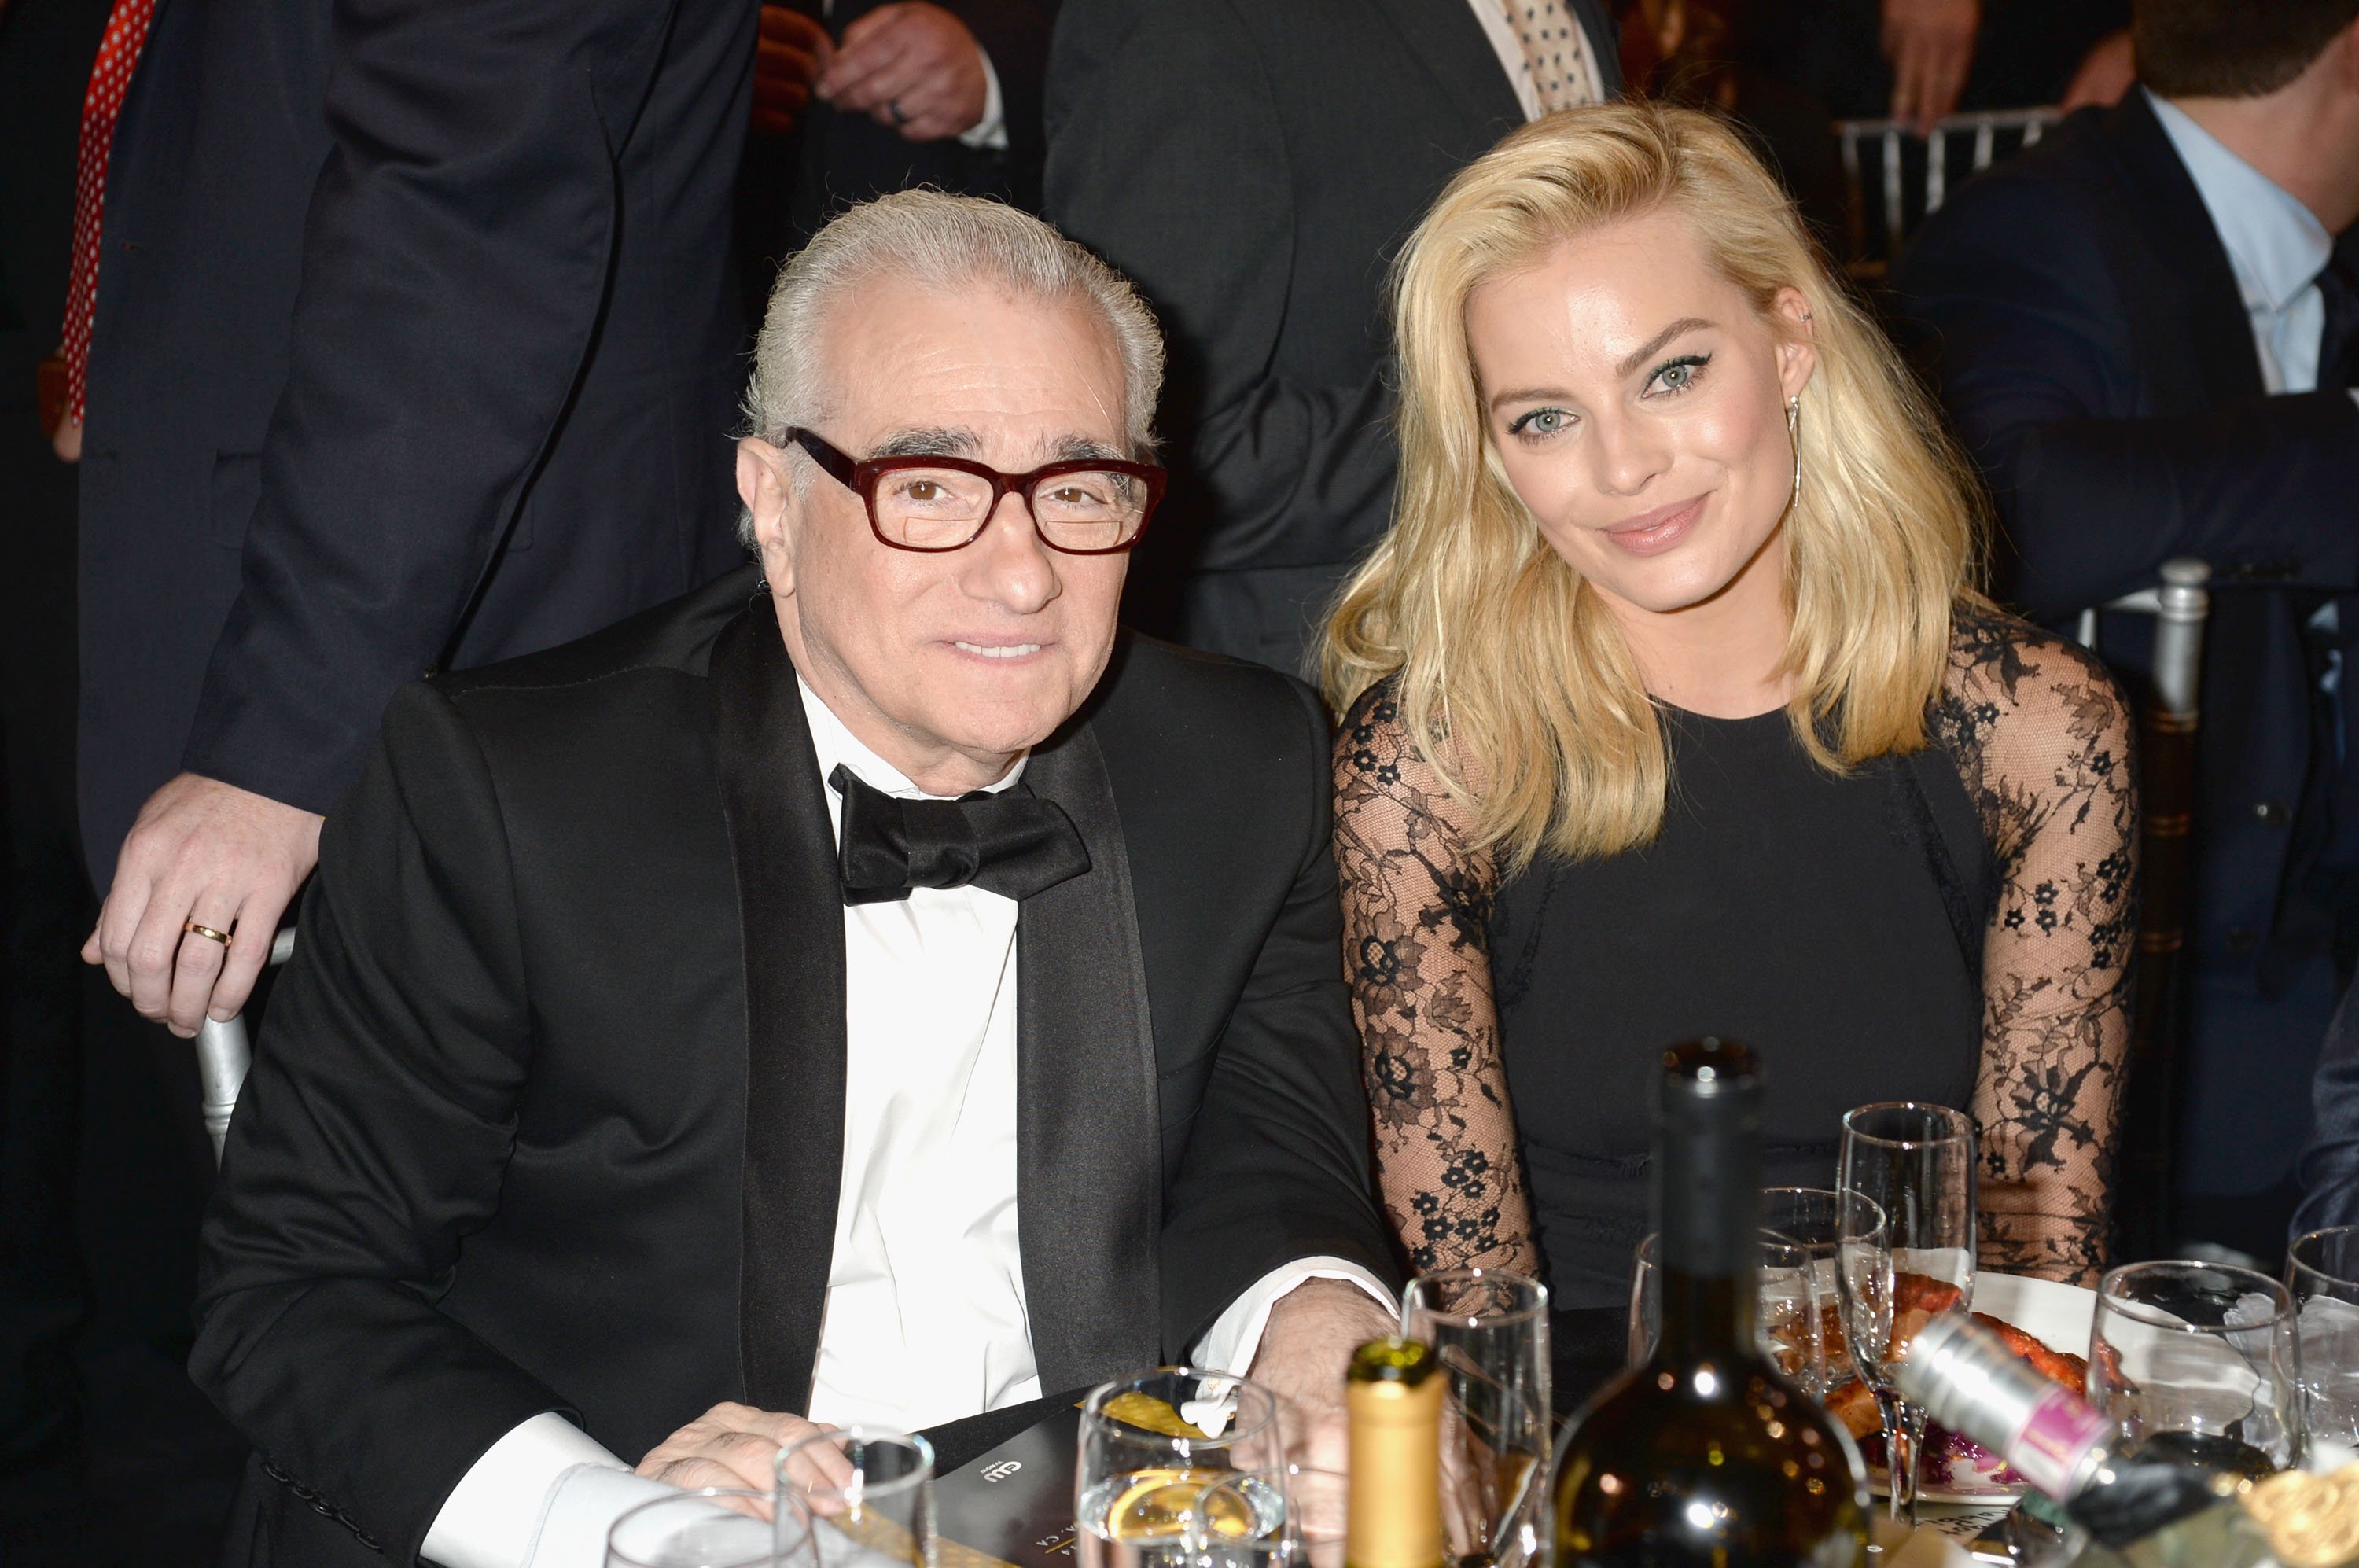 Director Martin Scorsese and actress Margot Robbie attend the 19th Annual Critics' Choice Movie Awards at Barker Hangar on January 16, 2014 in Santa Monica, California.